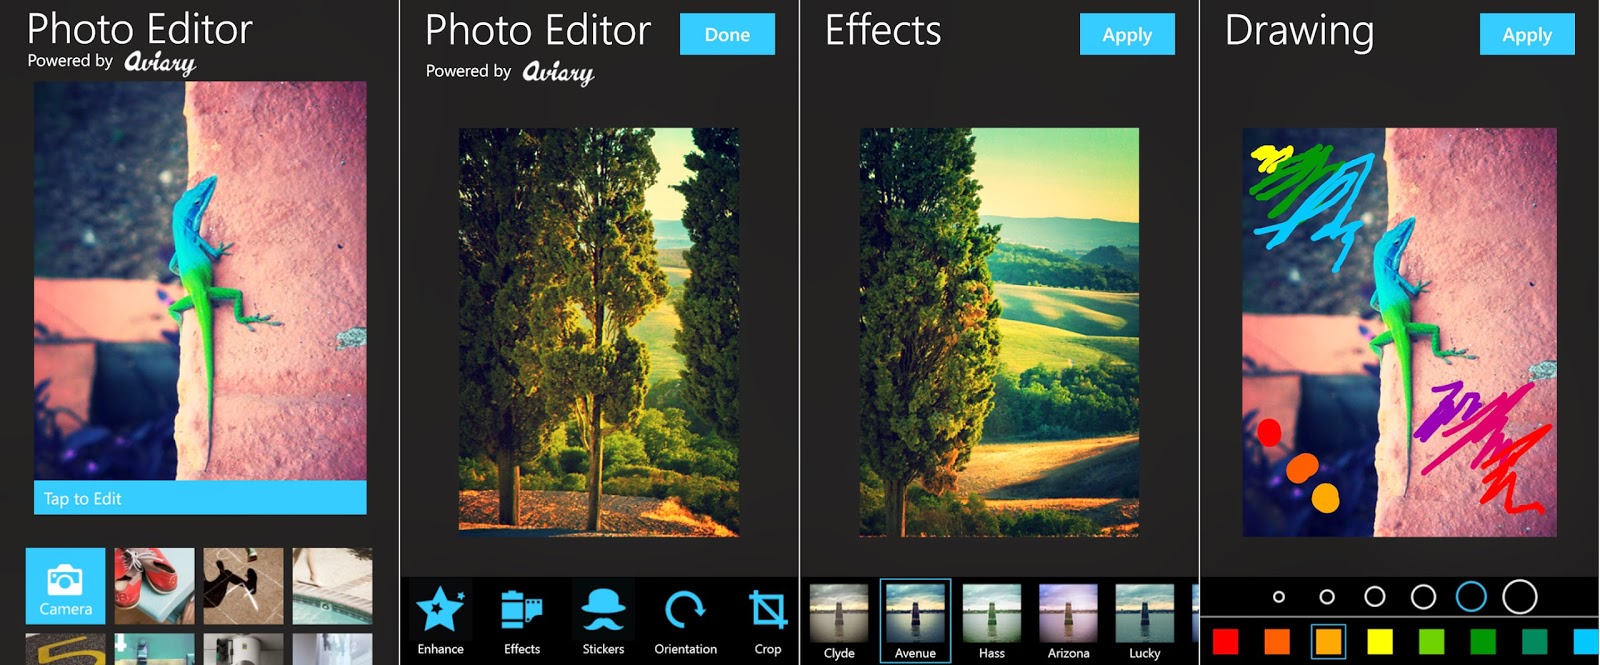 Top 10 Free Photo Editing Apps For Android Users ...